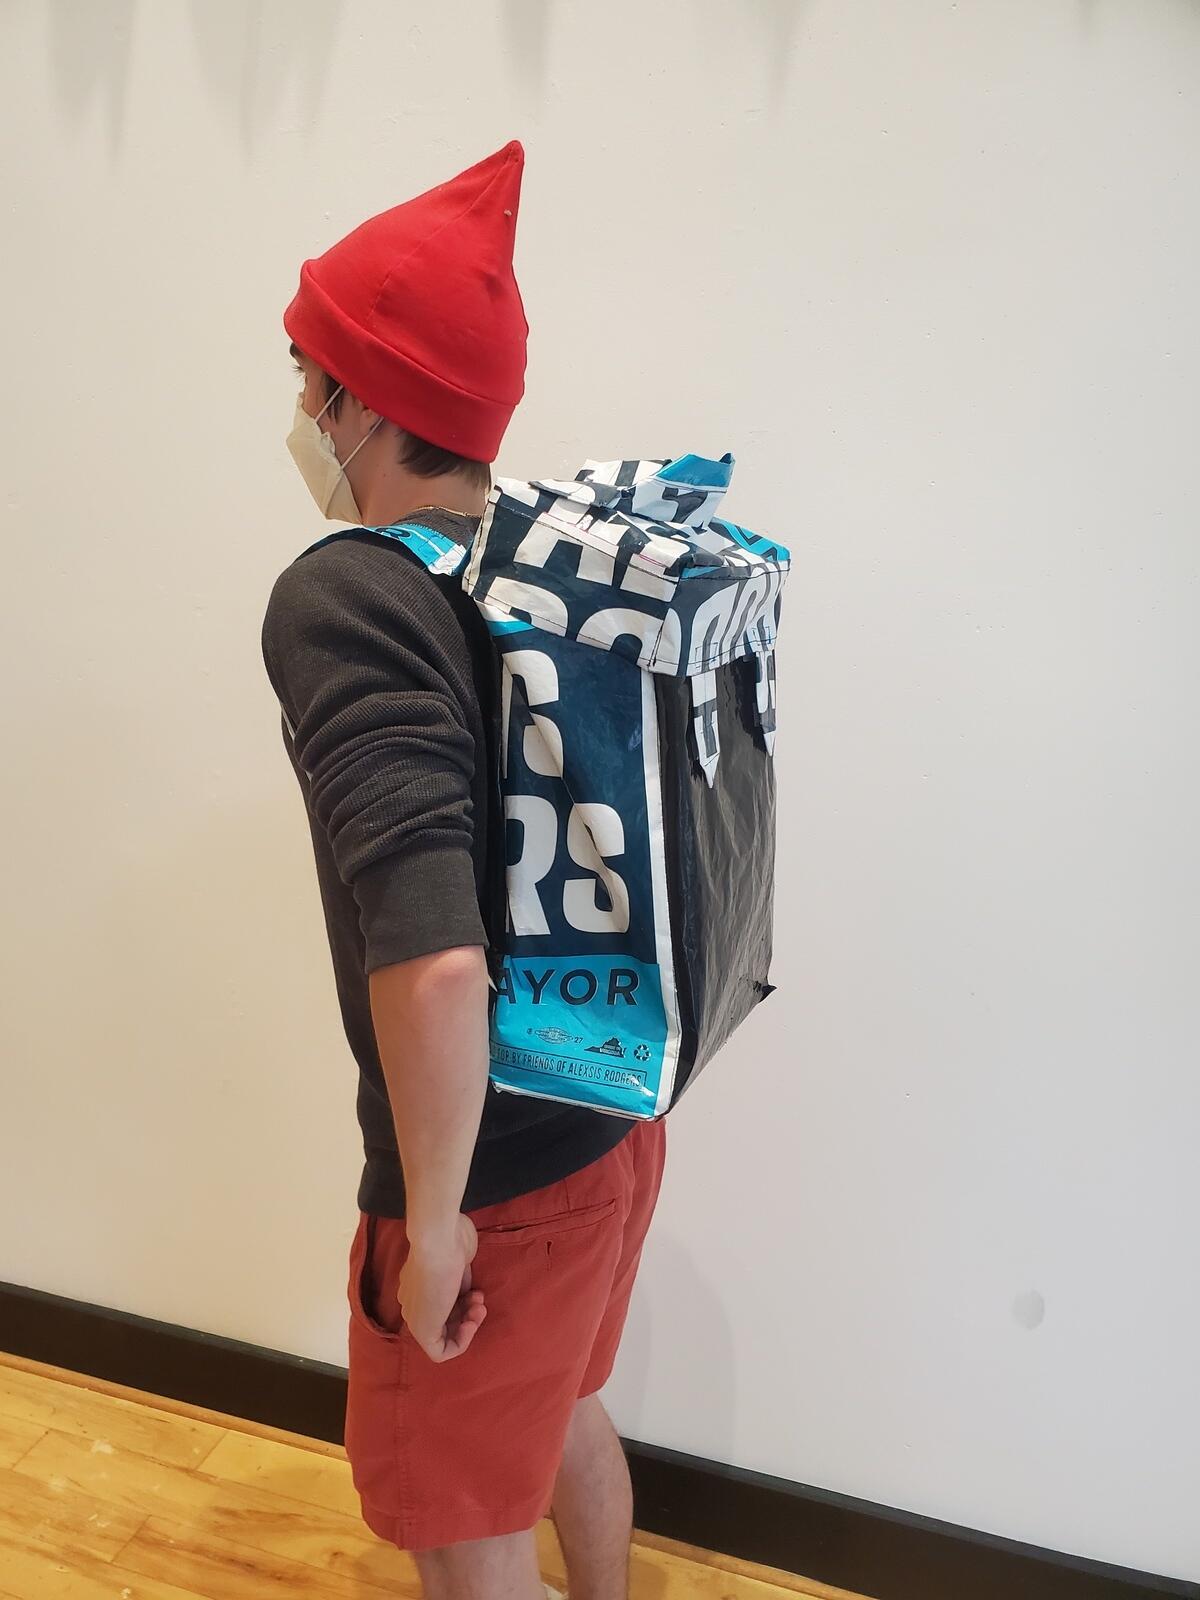 A person wearing a backpack made of political signs.